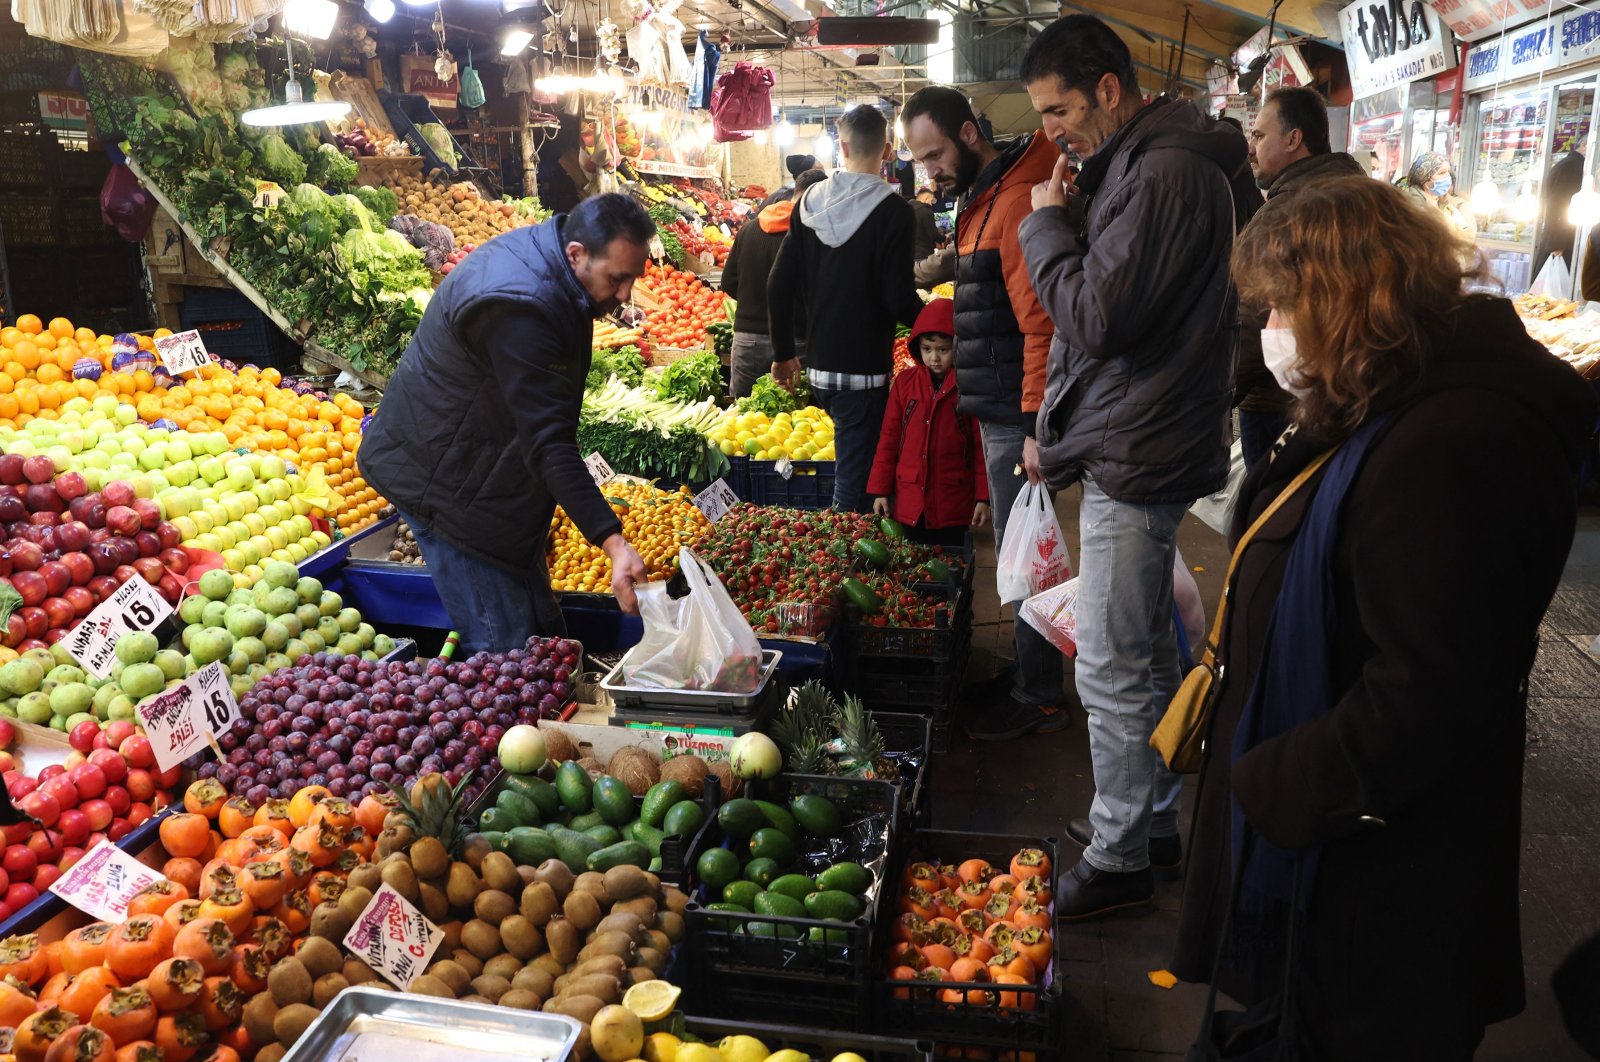 Customers buy vegetables and fruit at a public market in the historical district of Ulus in Ankara, Türkiye, Dec. 30, 2022. (AFP Photo)